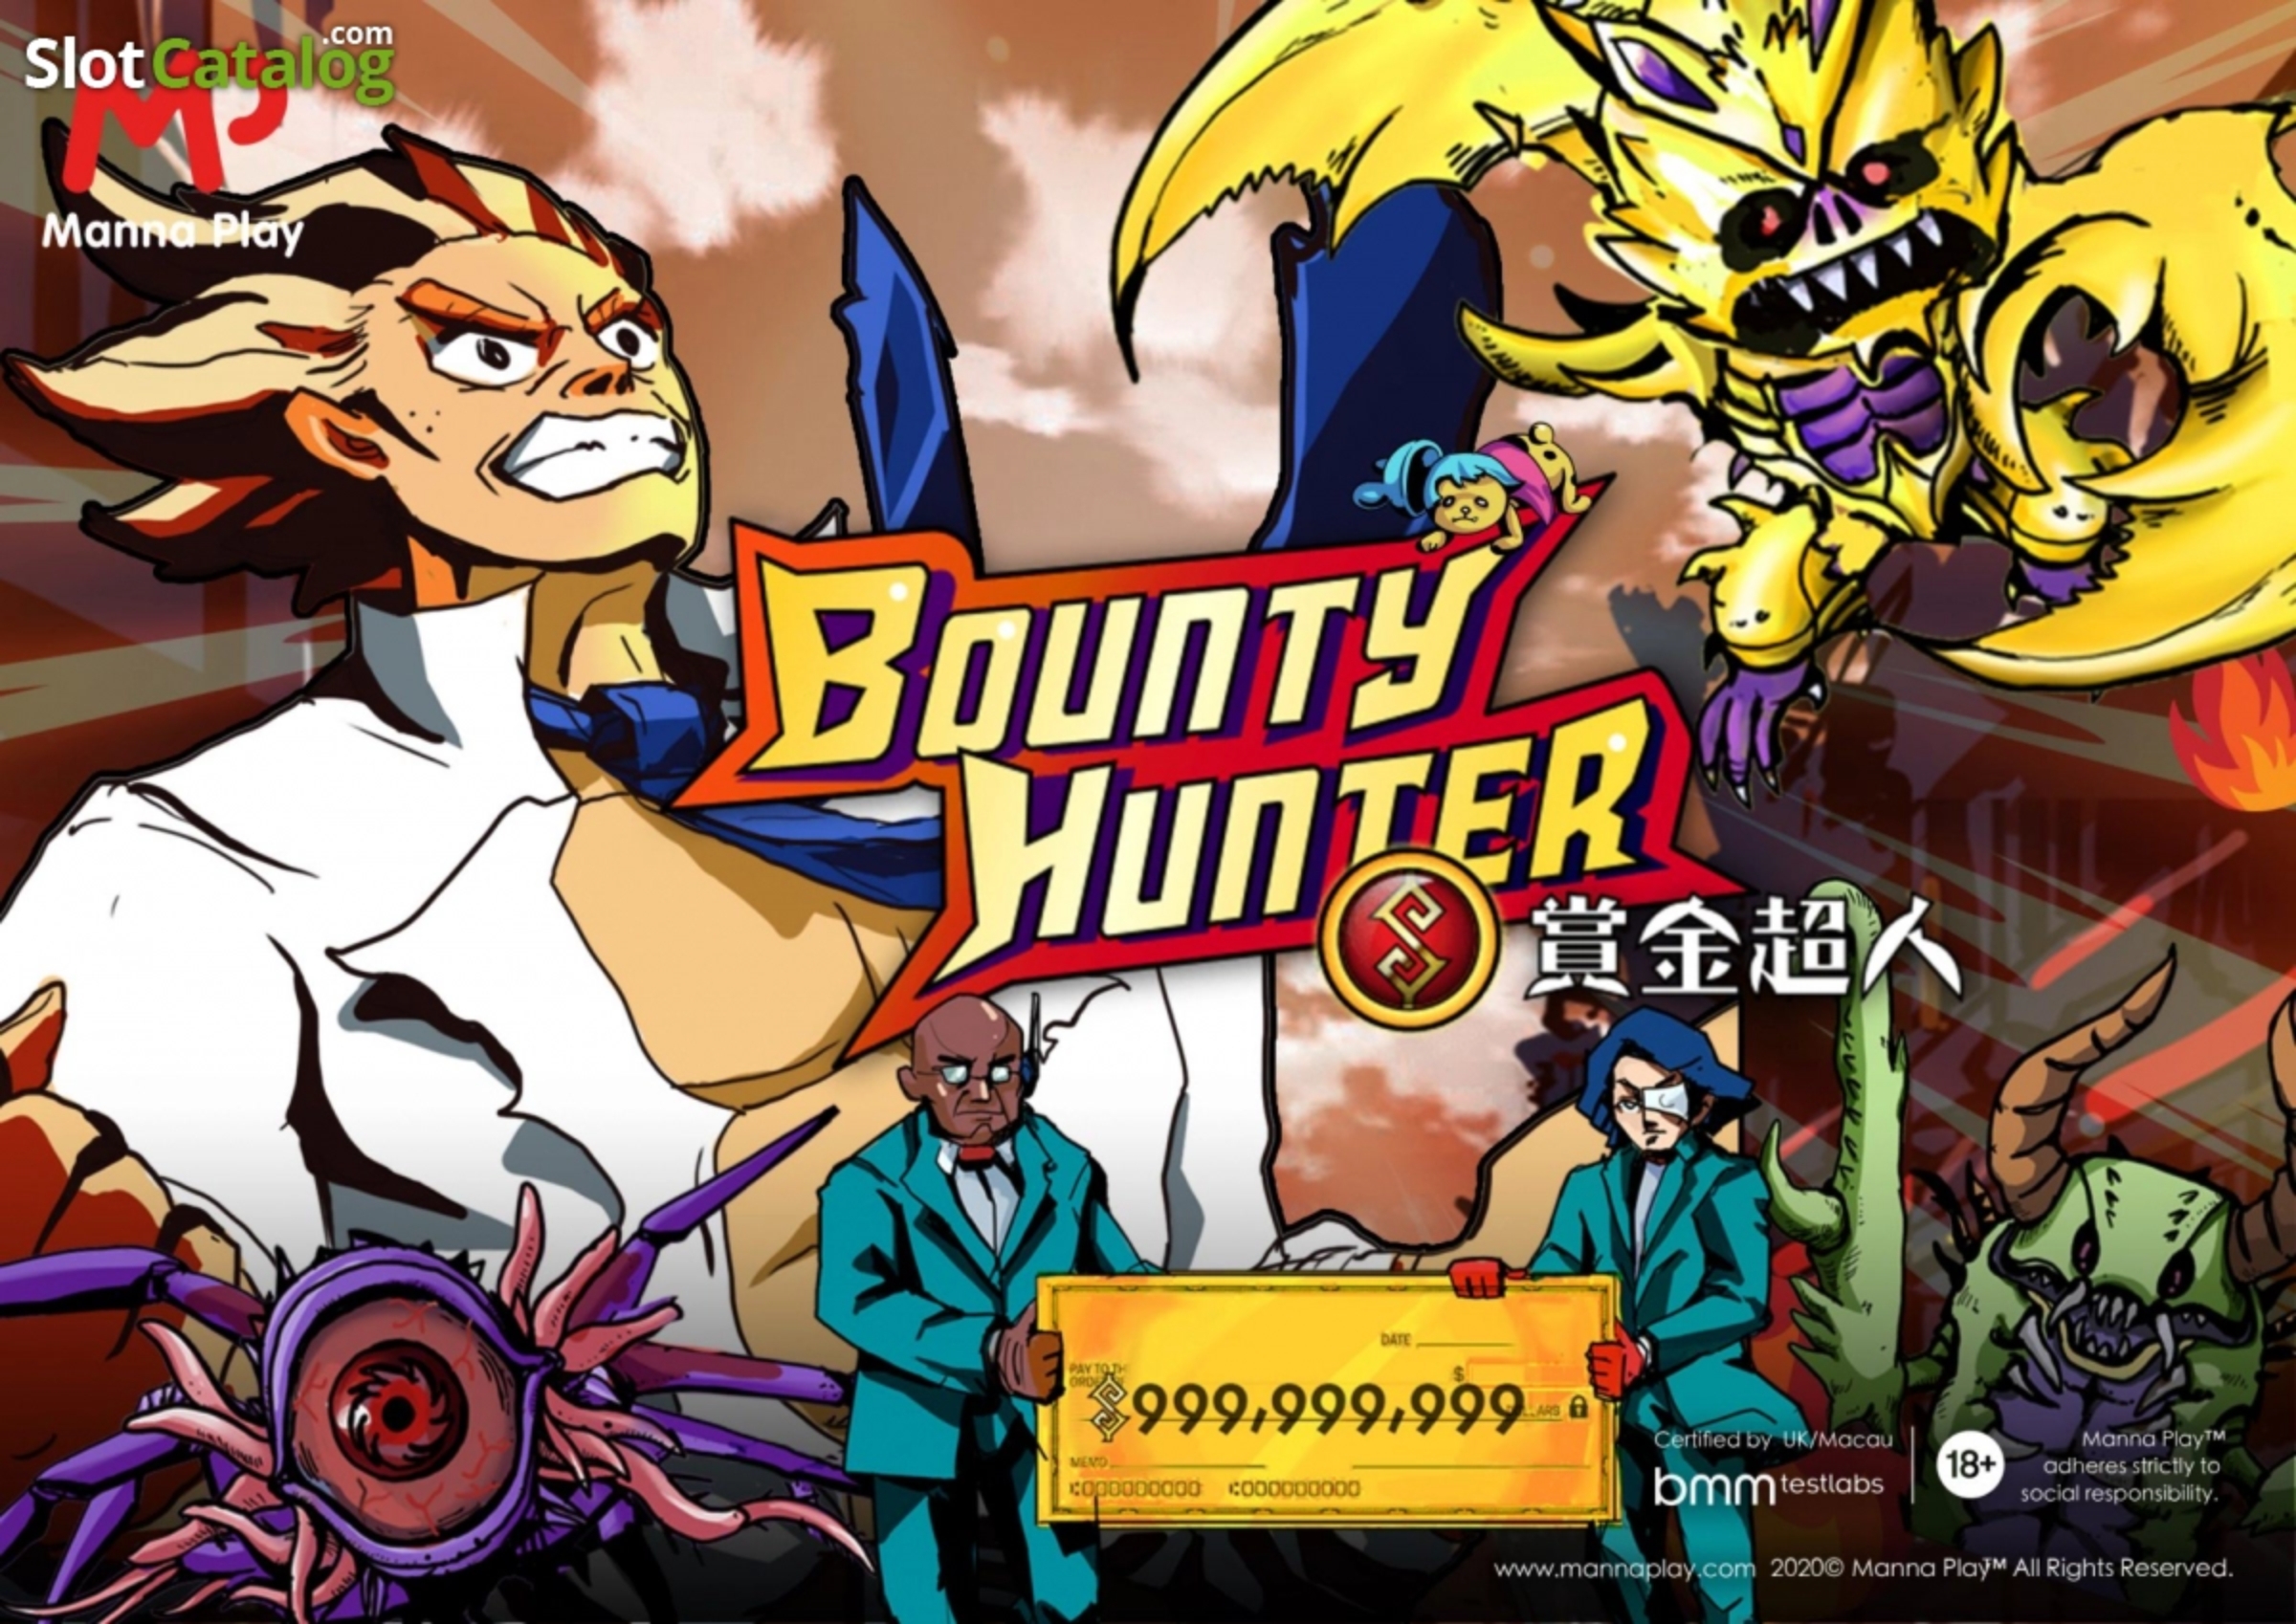 The Bounty Hunter Online Slot Demo Game by Manna Play